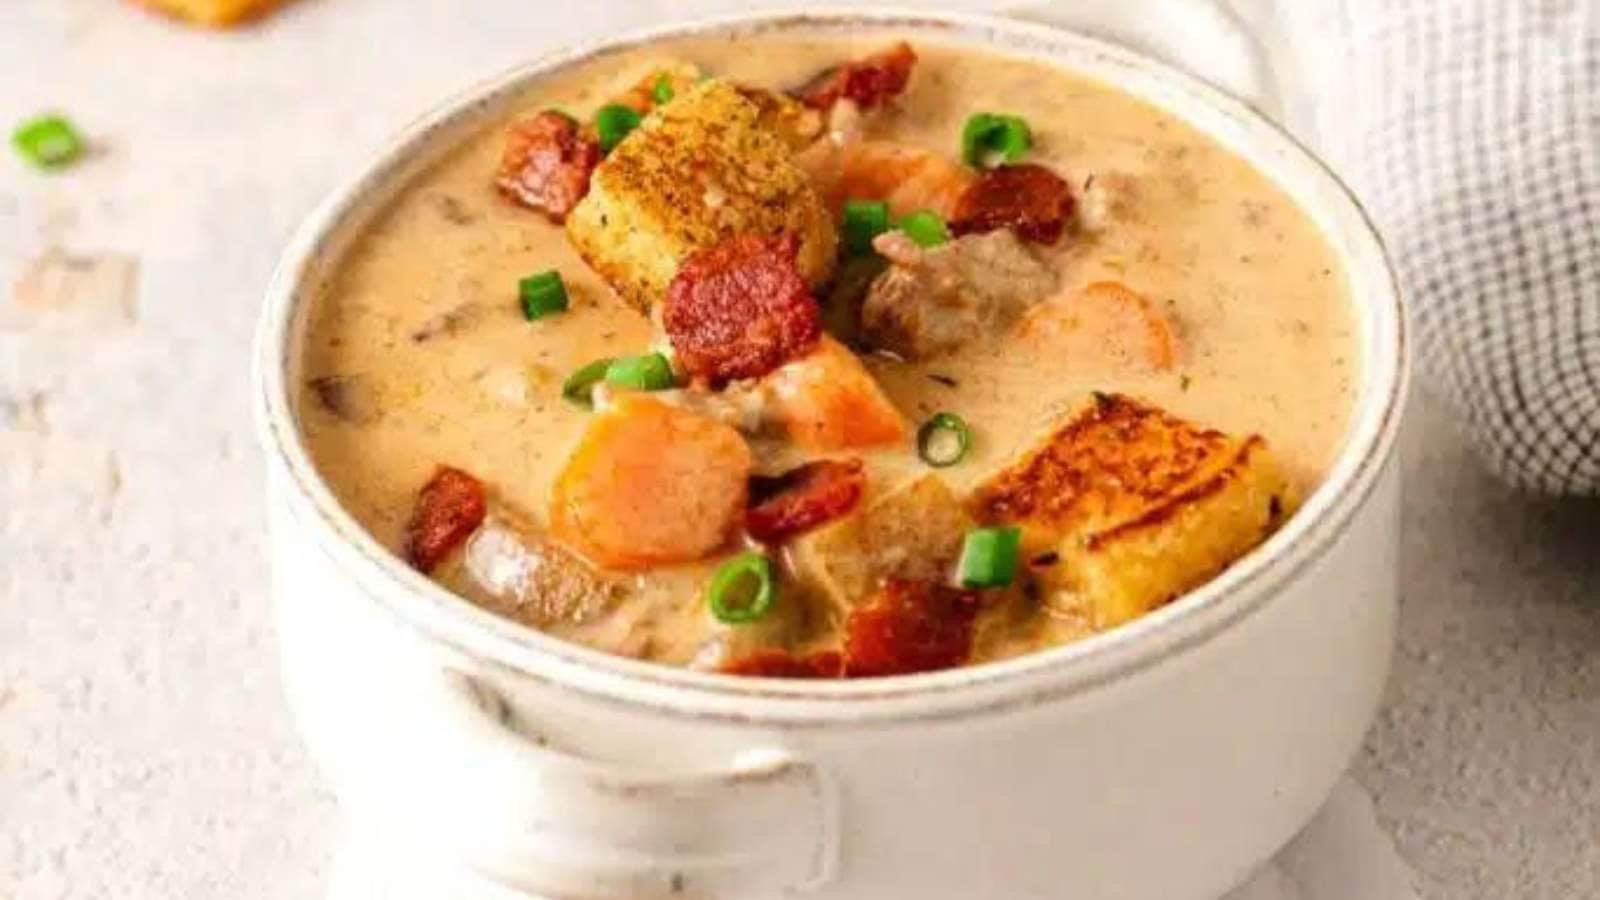 Bacon Cheeseburger Soup recipe by Confetti And Bliss.